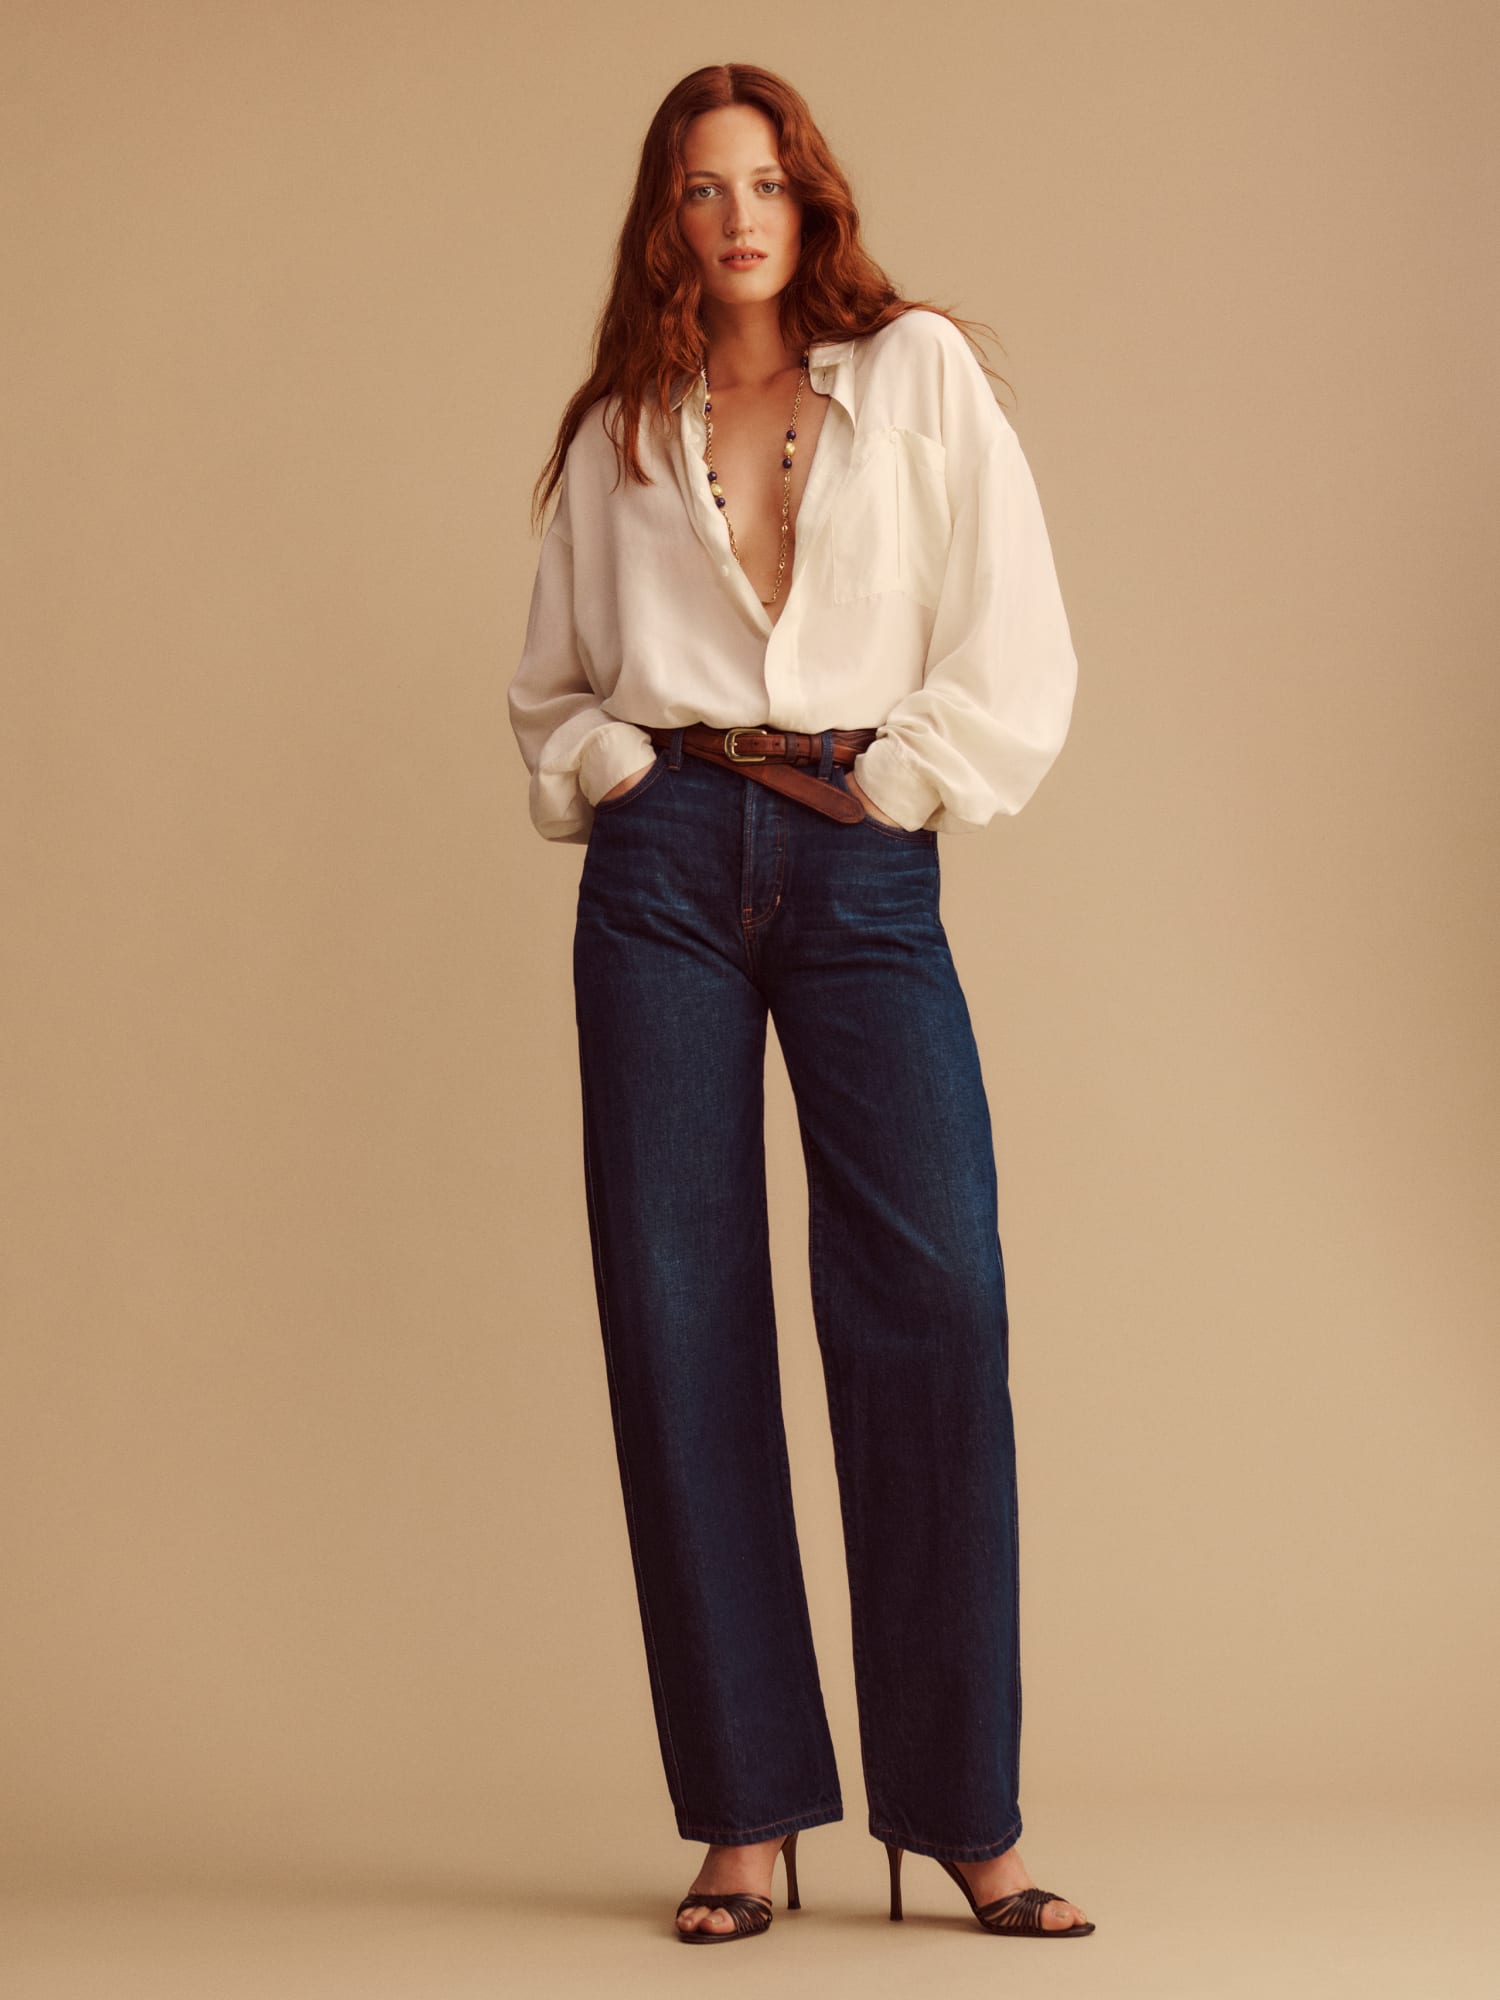 Magnolia Rise Bow Jeans - Sustainable Denim | Reformation